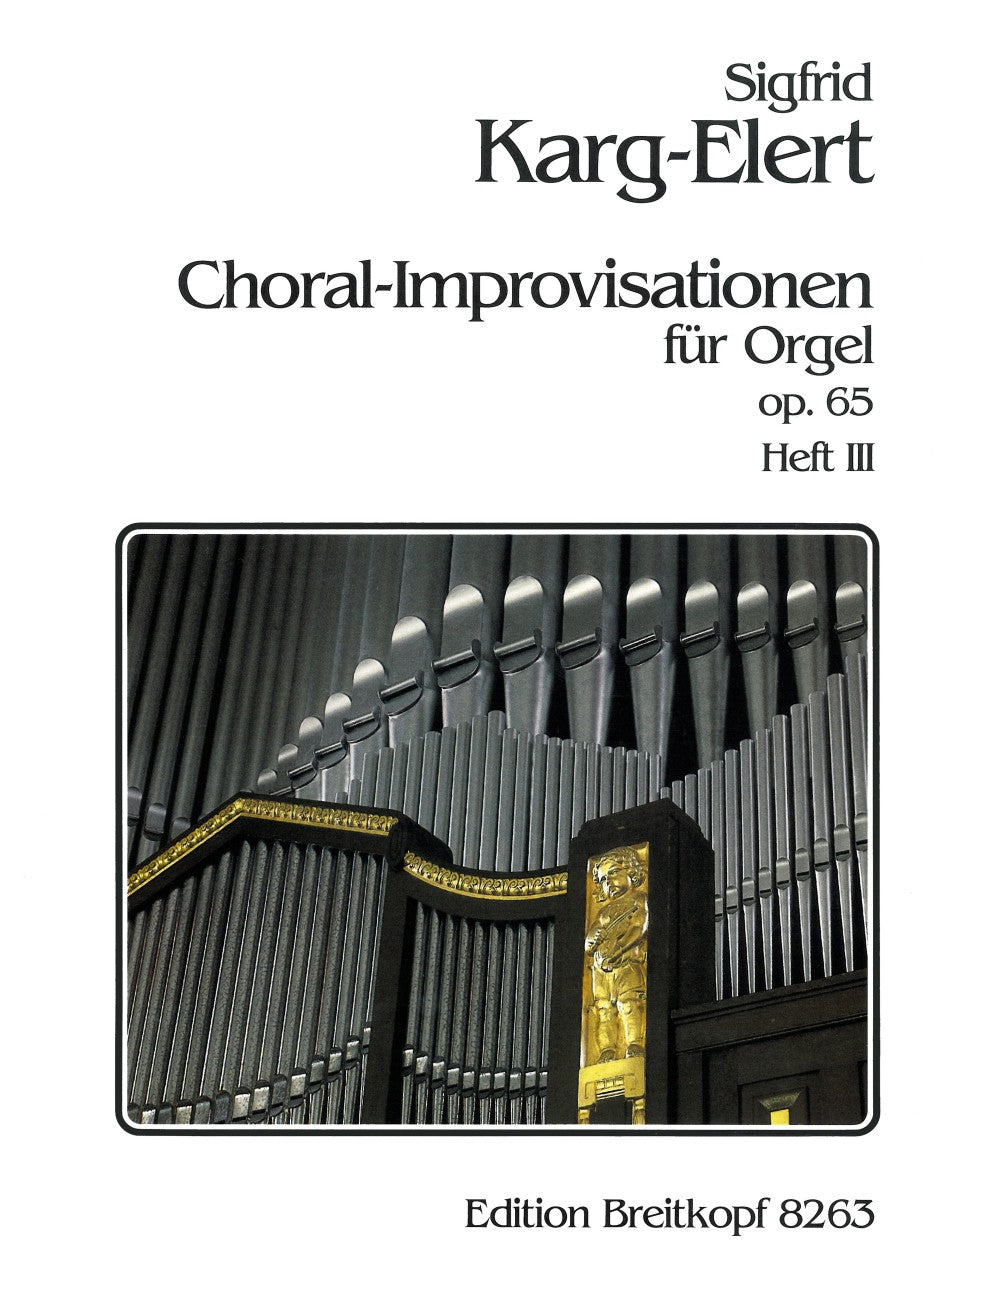 Karg-Elert: 66 Chorale Improvisations, Op. 65 - Volume 3 (New Year, Easter and other Holydays)